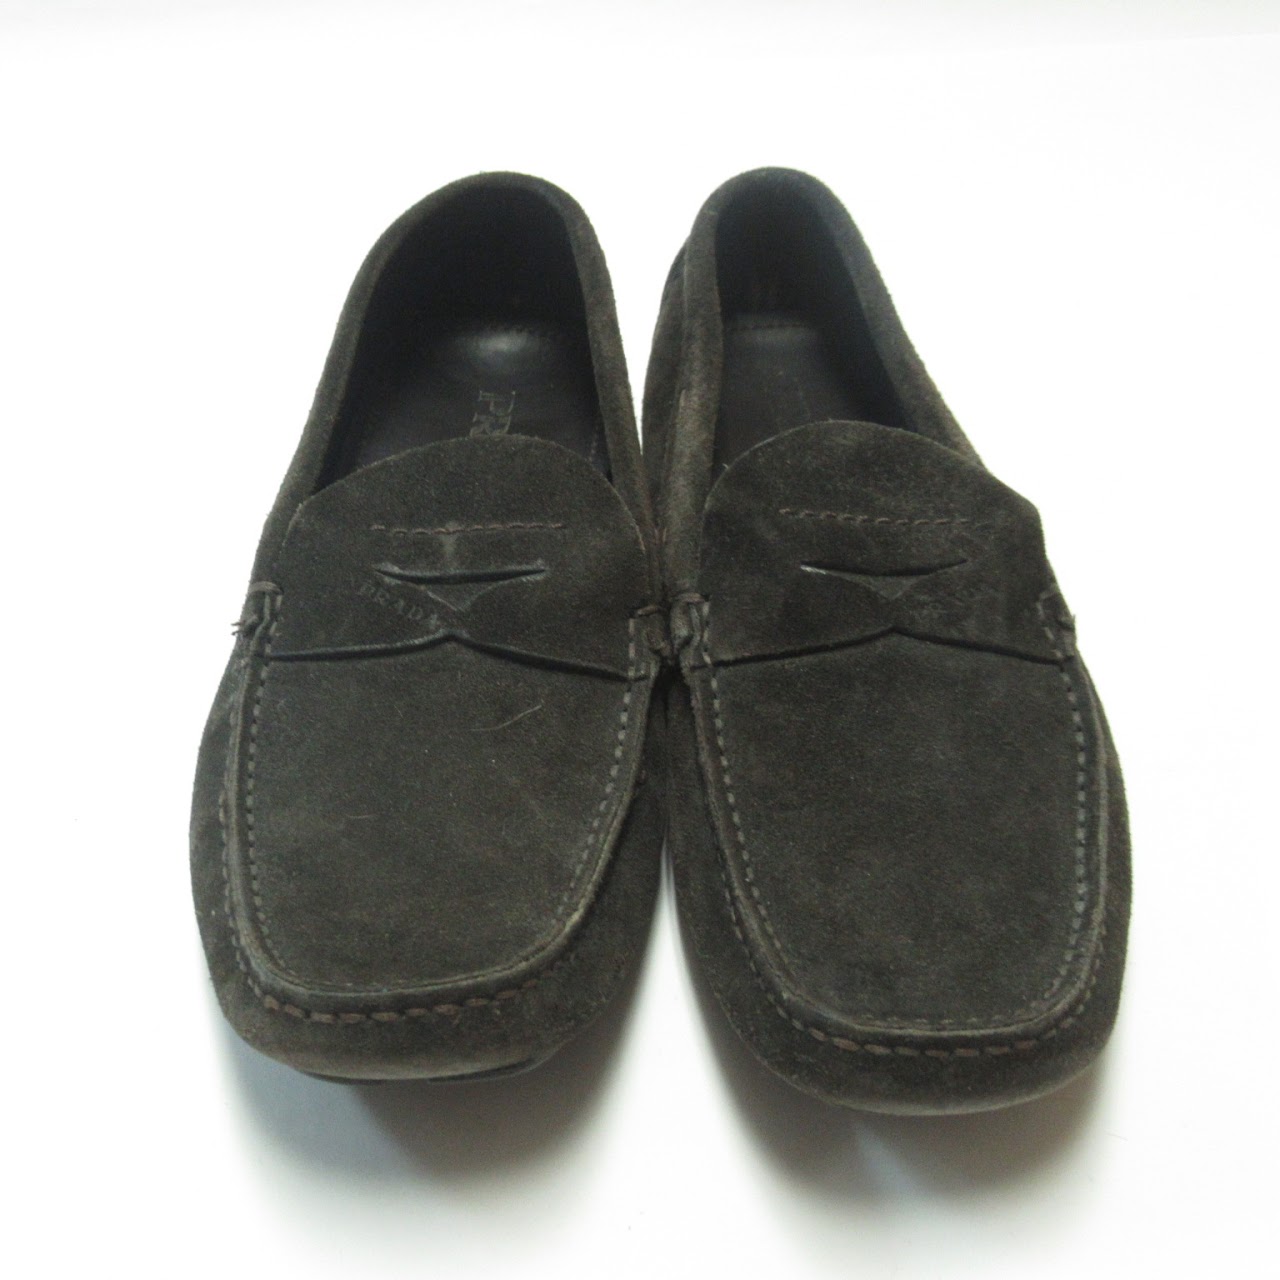 Prada Brown Suede Loafers